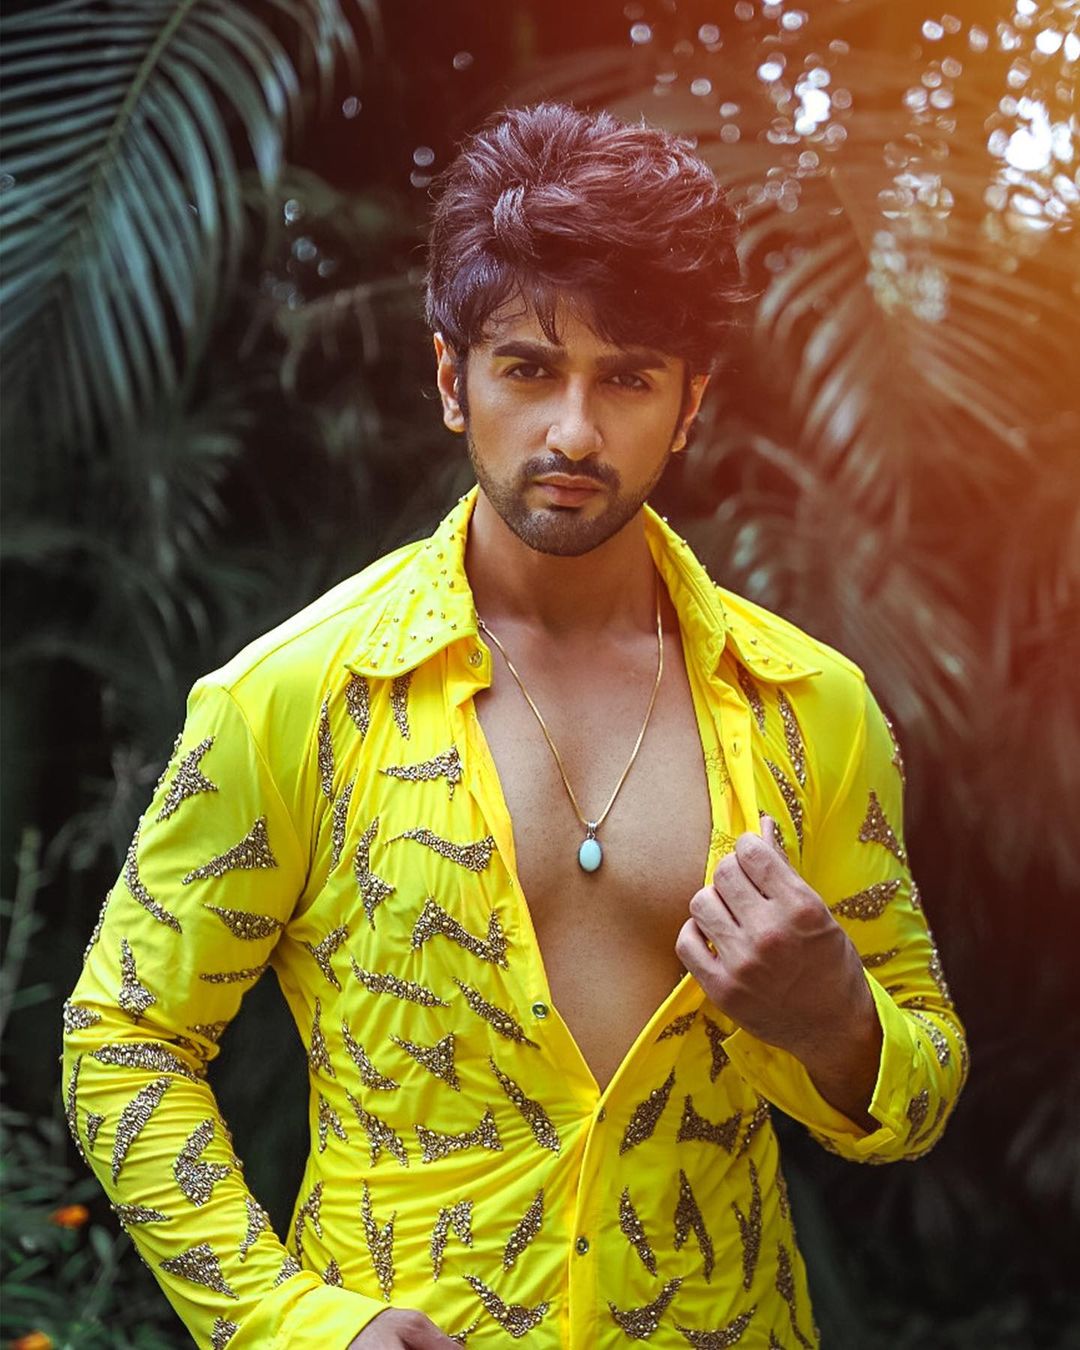 Dheeraj Dhoopar, Nishant Singh Malkani, And Aly Goni In Neon Colour Outfits 2